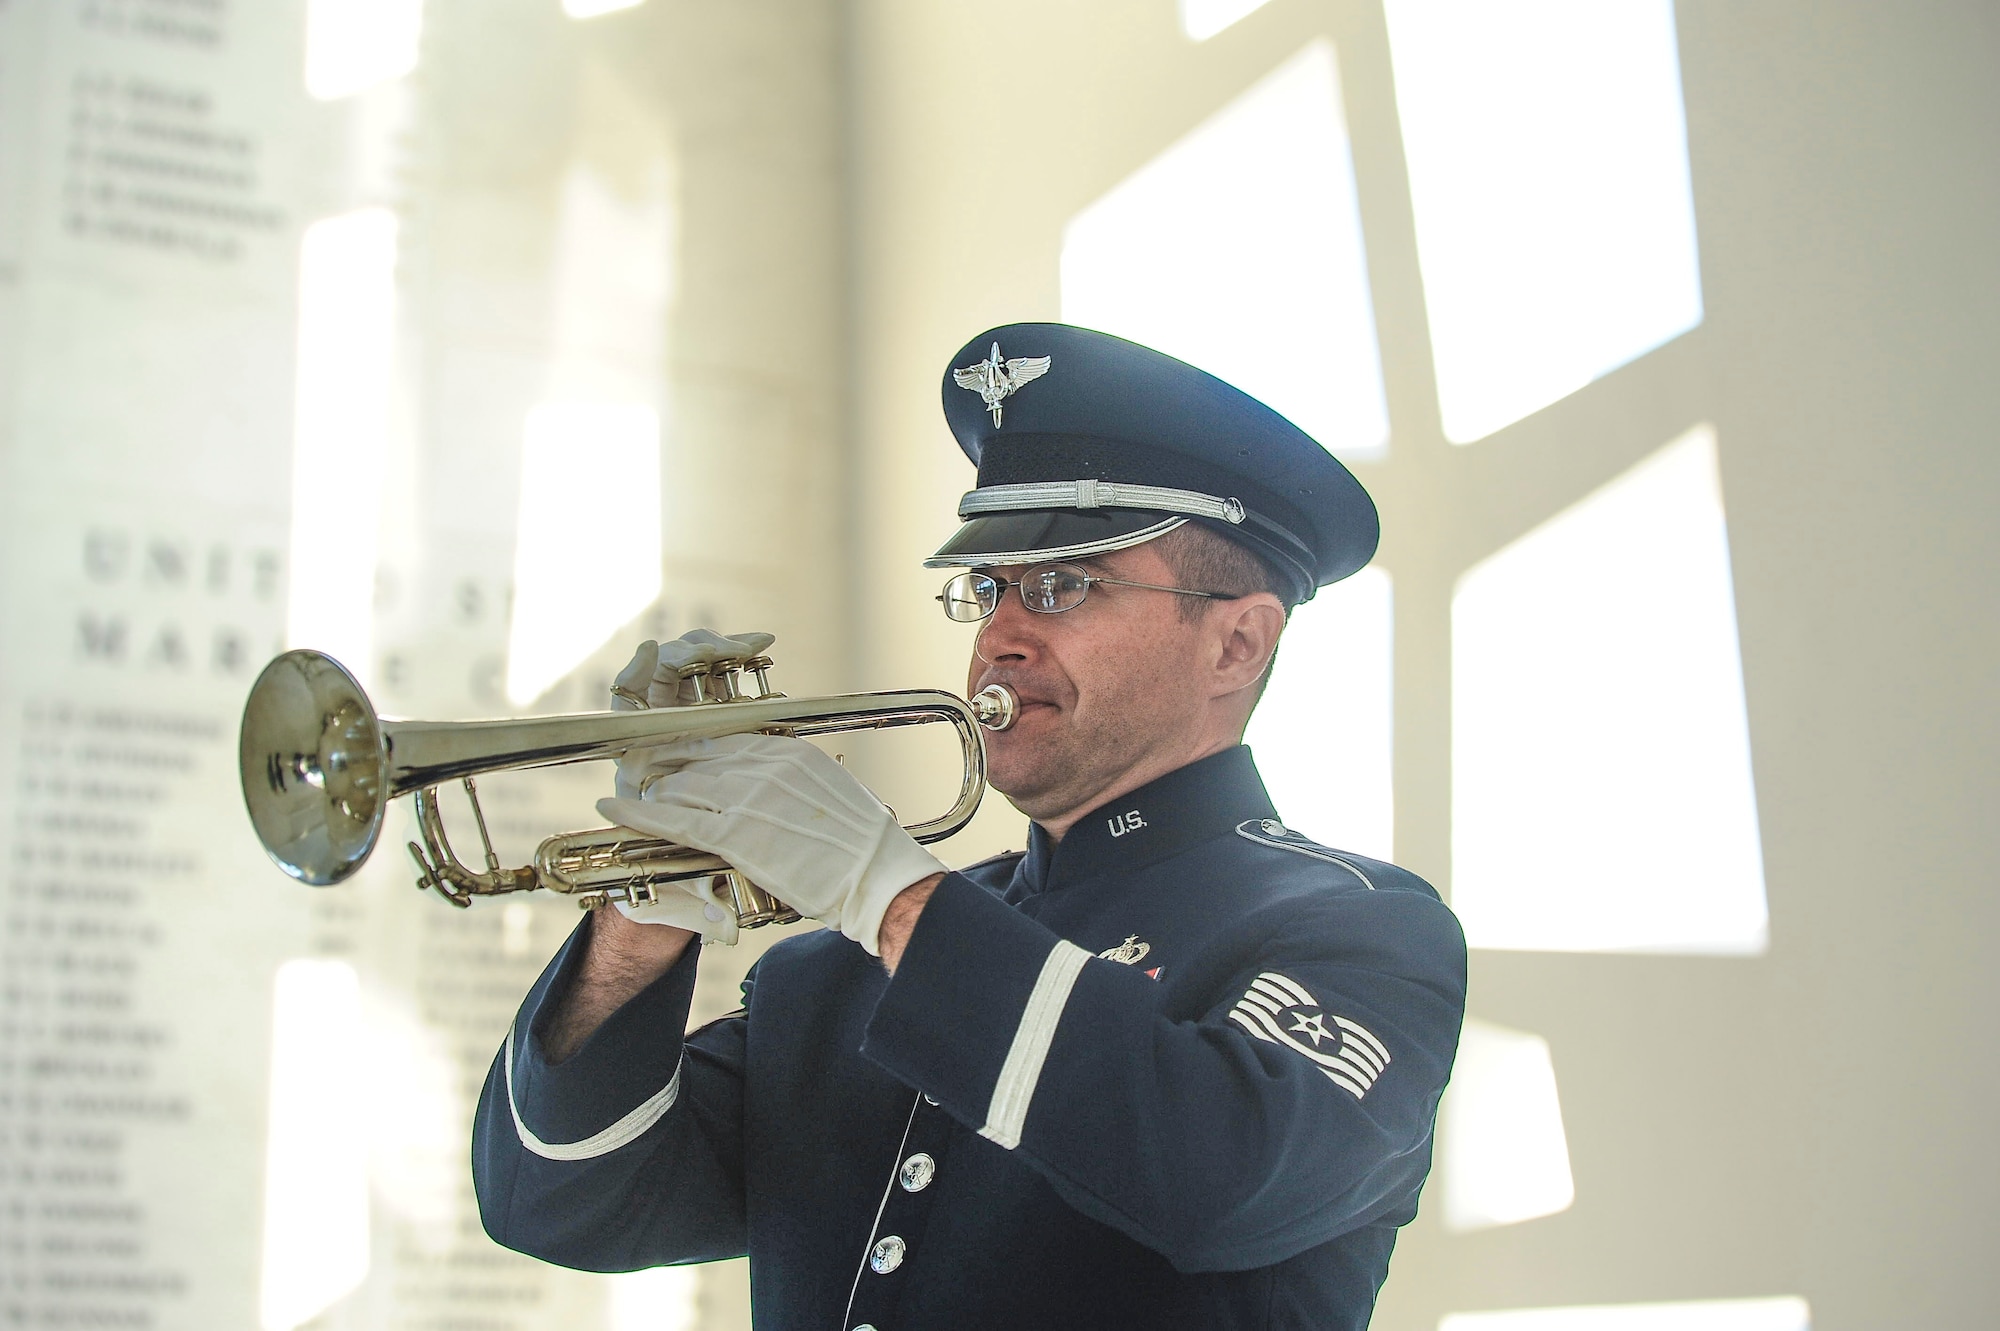 TSgt David Diamond performs taps for a ceremony on the USS Airzona Memorial in commemoration of the 75th Anniversary of the bombing at Pearl Harbor.